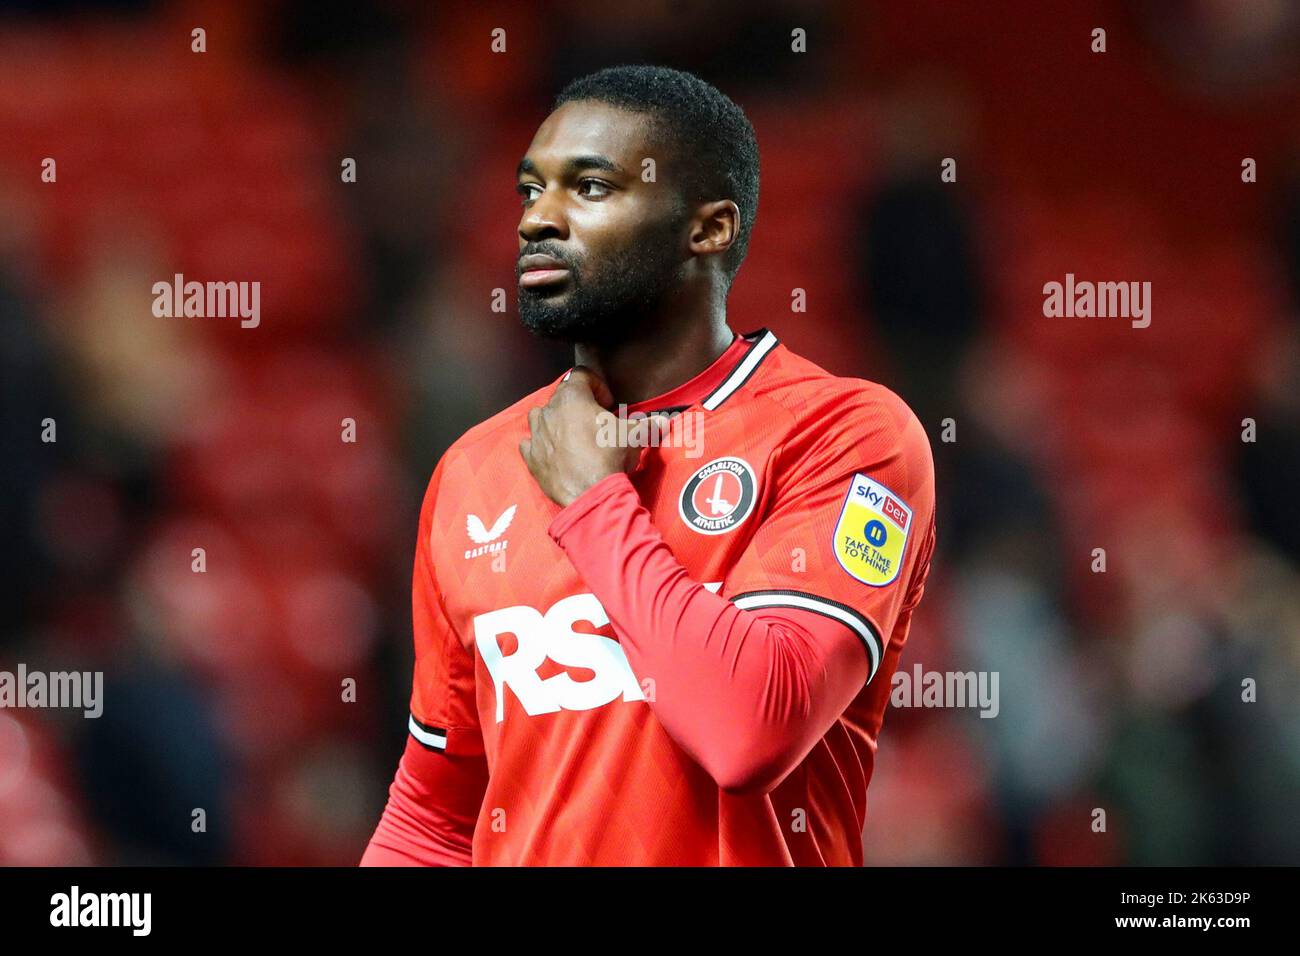 London, UK. 11th October 2022. Mandela Egbo of Charlton Athletic during the Sky Bet League 1 match between Charlton Athletic and Exeter City at The Valley, London on Tuesday 11th October 2022. (Credit: Tom West | MI News) Credit: MI News & Sport /Alamy Live News Stock Photo